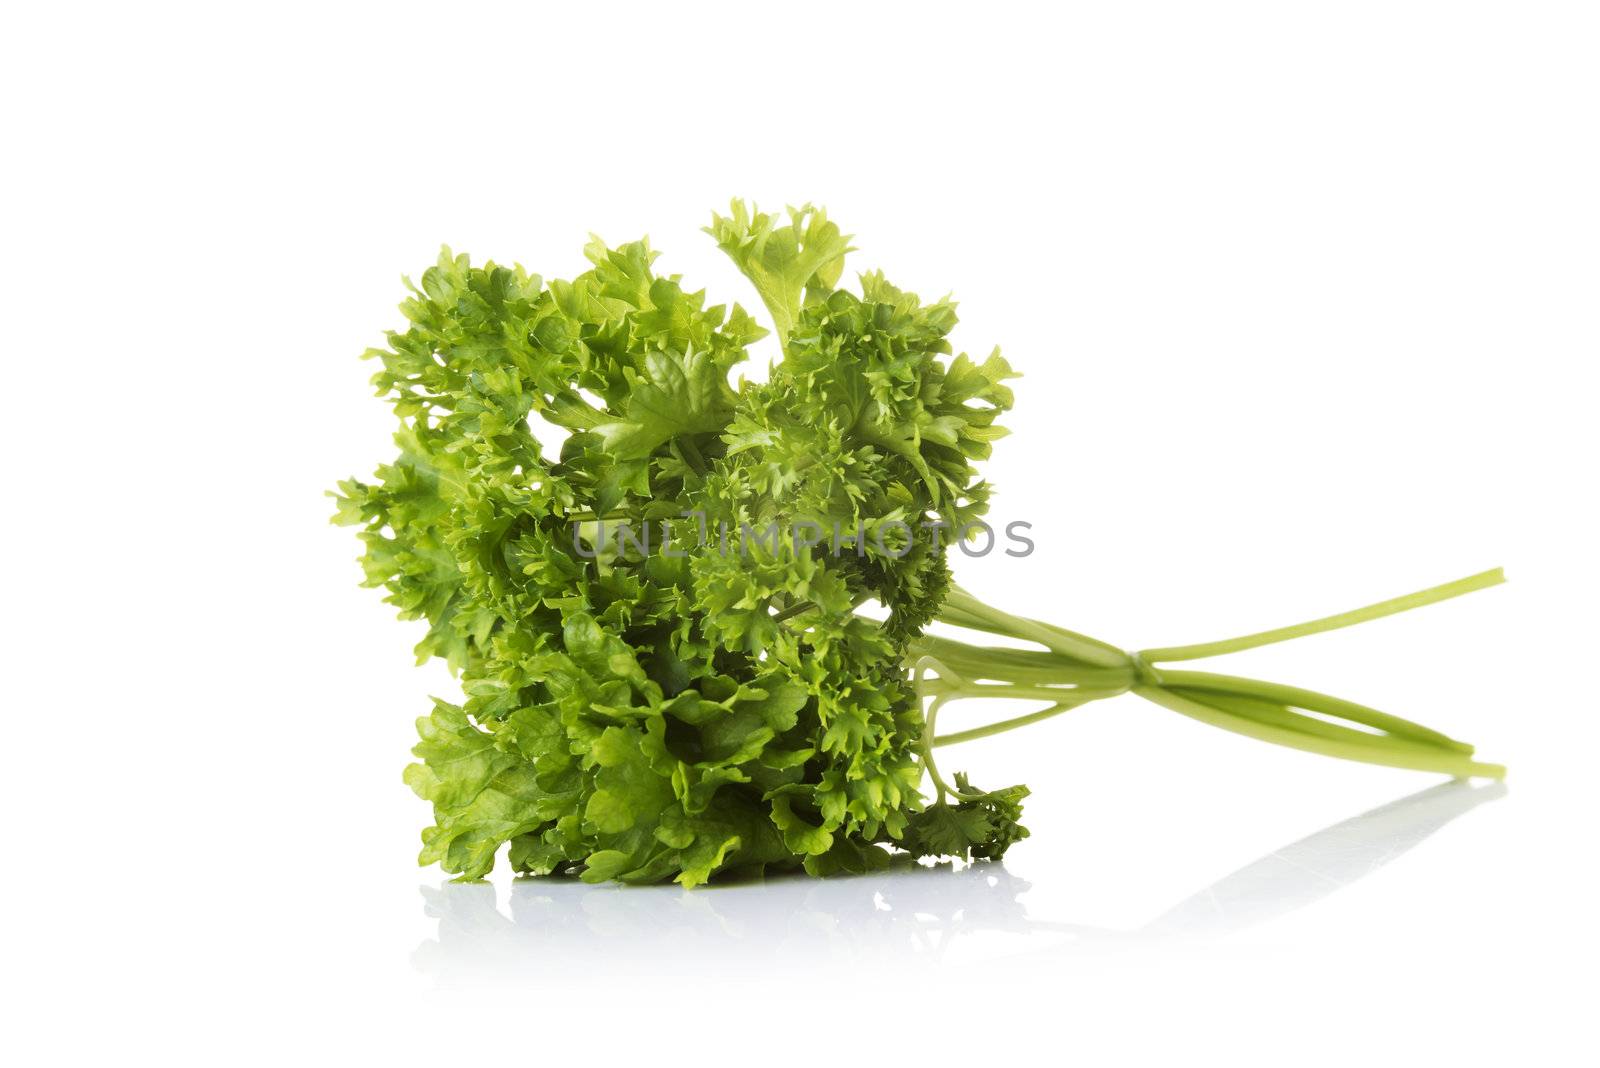 Parsley by BDS